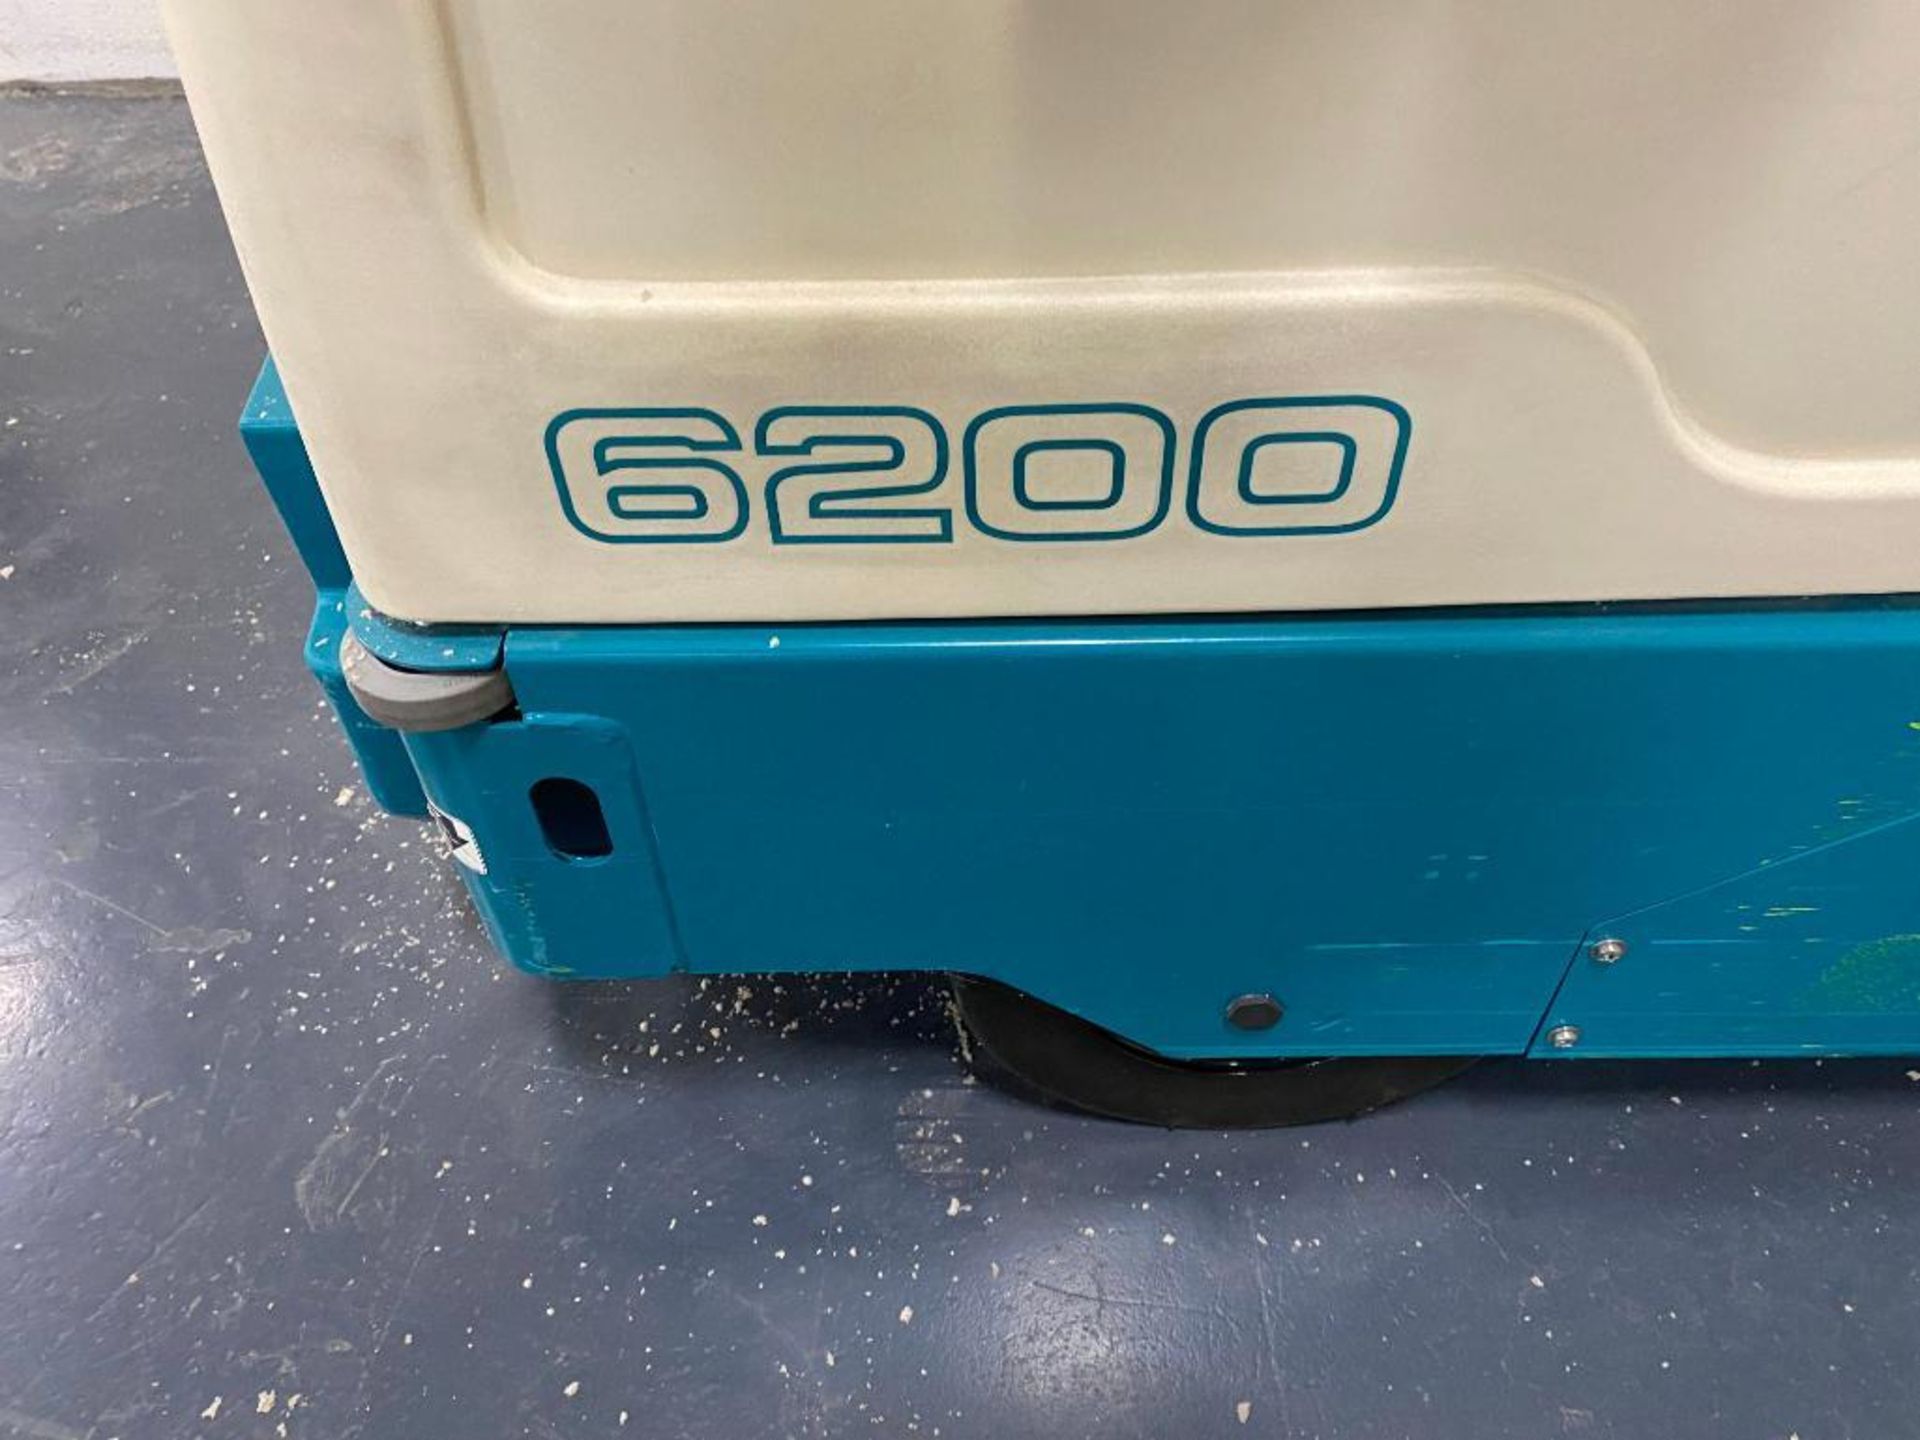 Tennant 6200 Floor Scrubber, 457 Hours, 36 V (Needs New Batteries) - Image 3 of 3